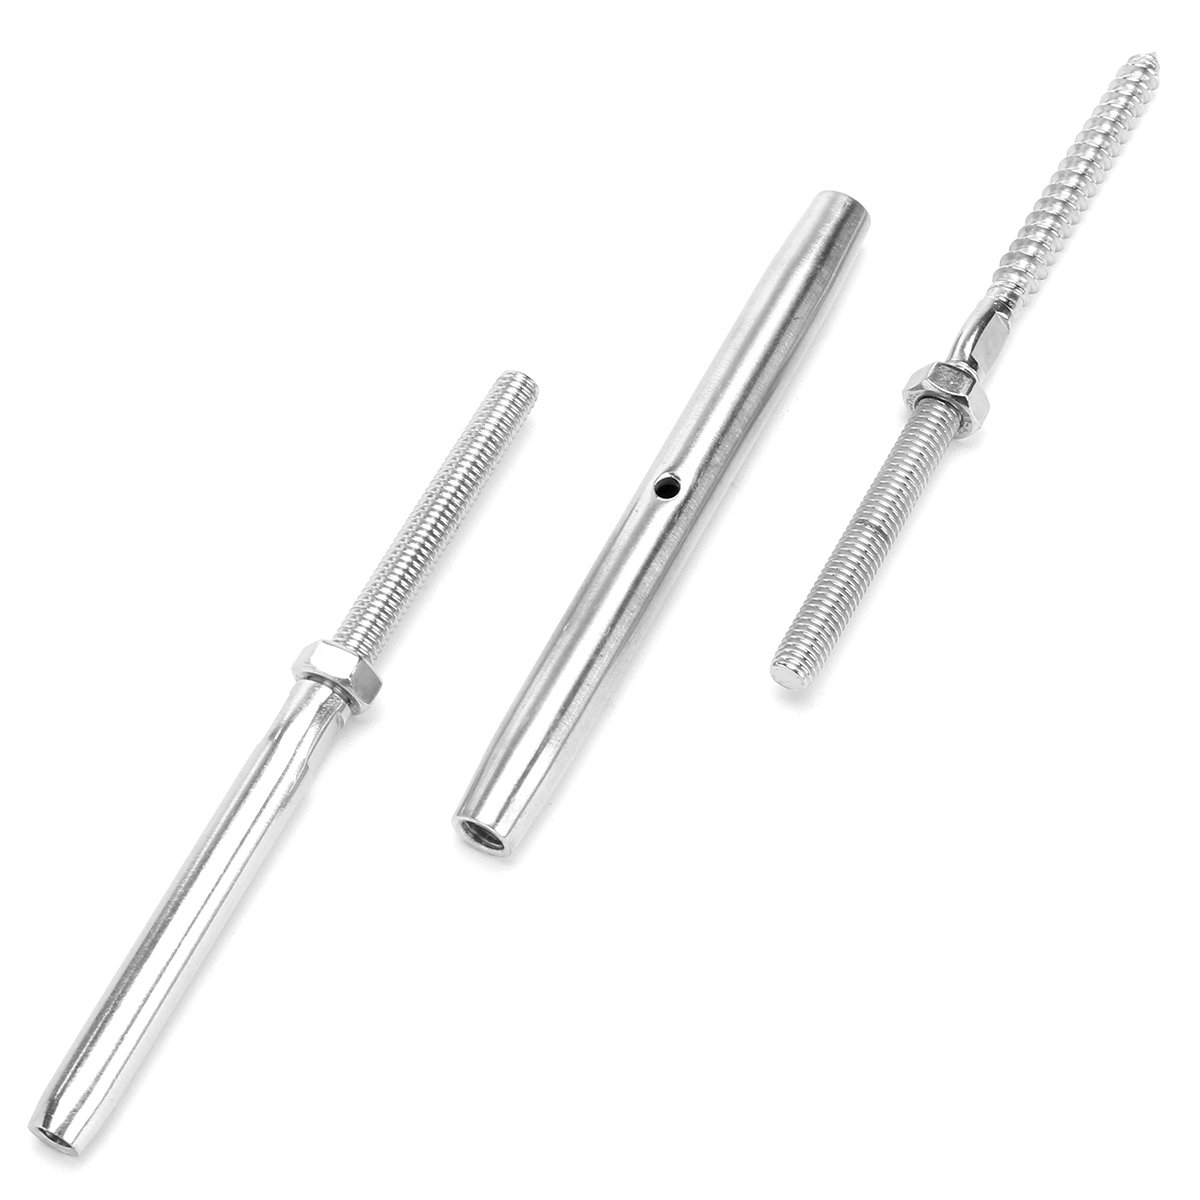 10Set-Balustrade-Cable-Fixing-Kit-Stainless-Steel-Lag-Screw-Swage-Terminal-1242466-1